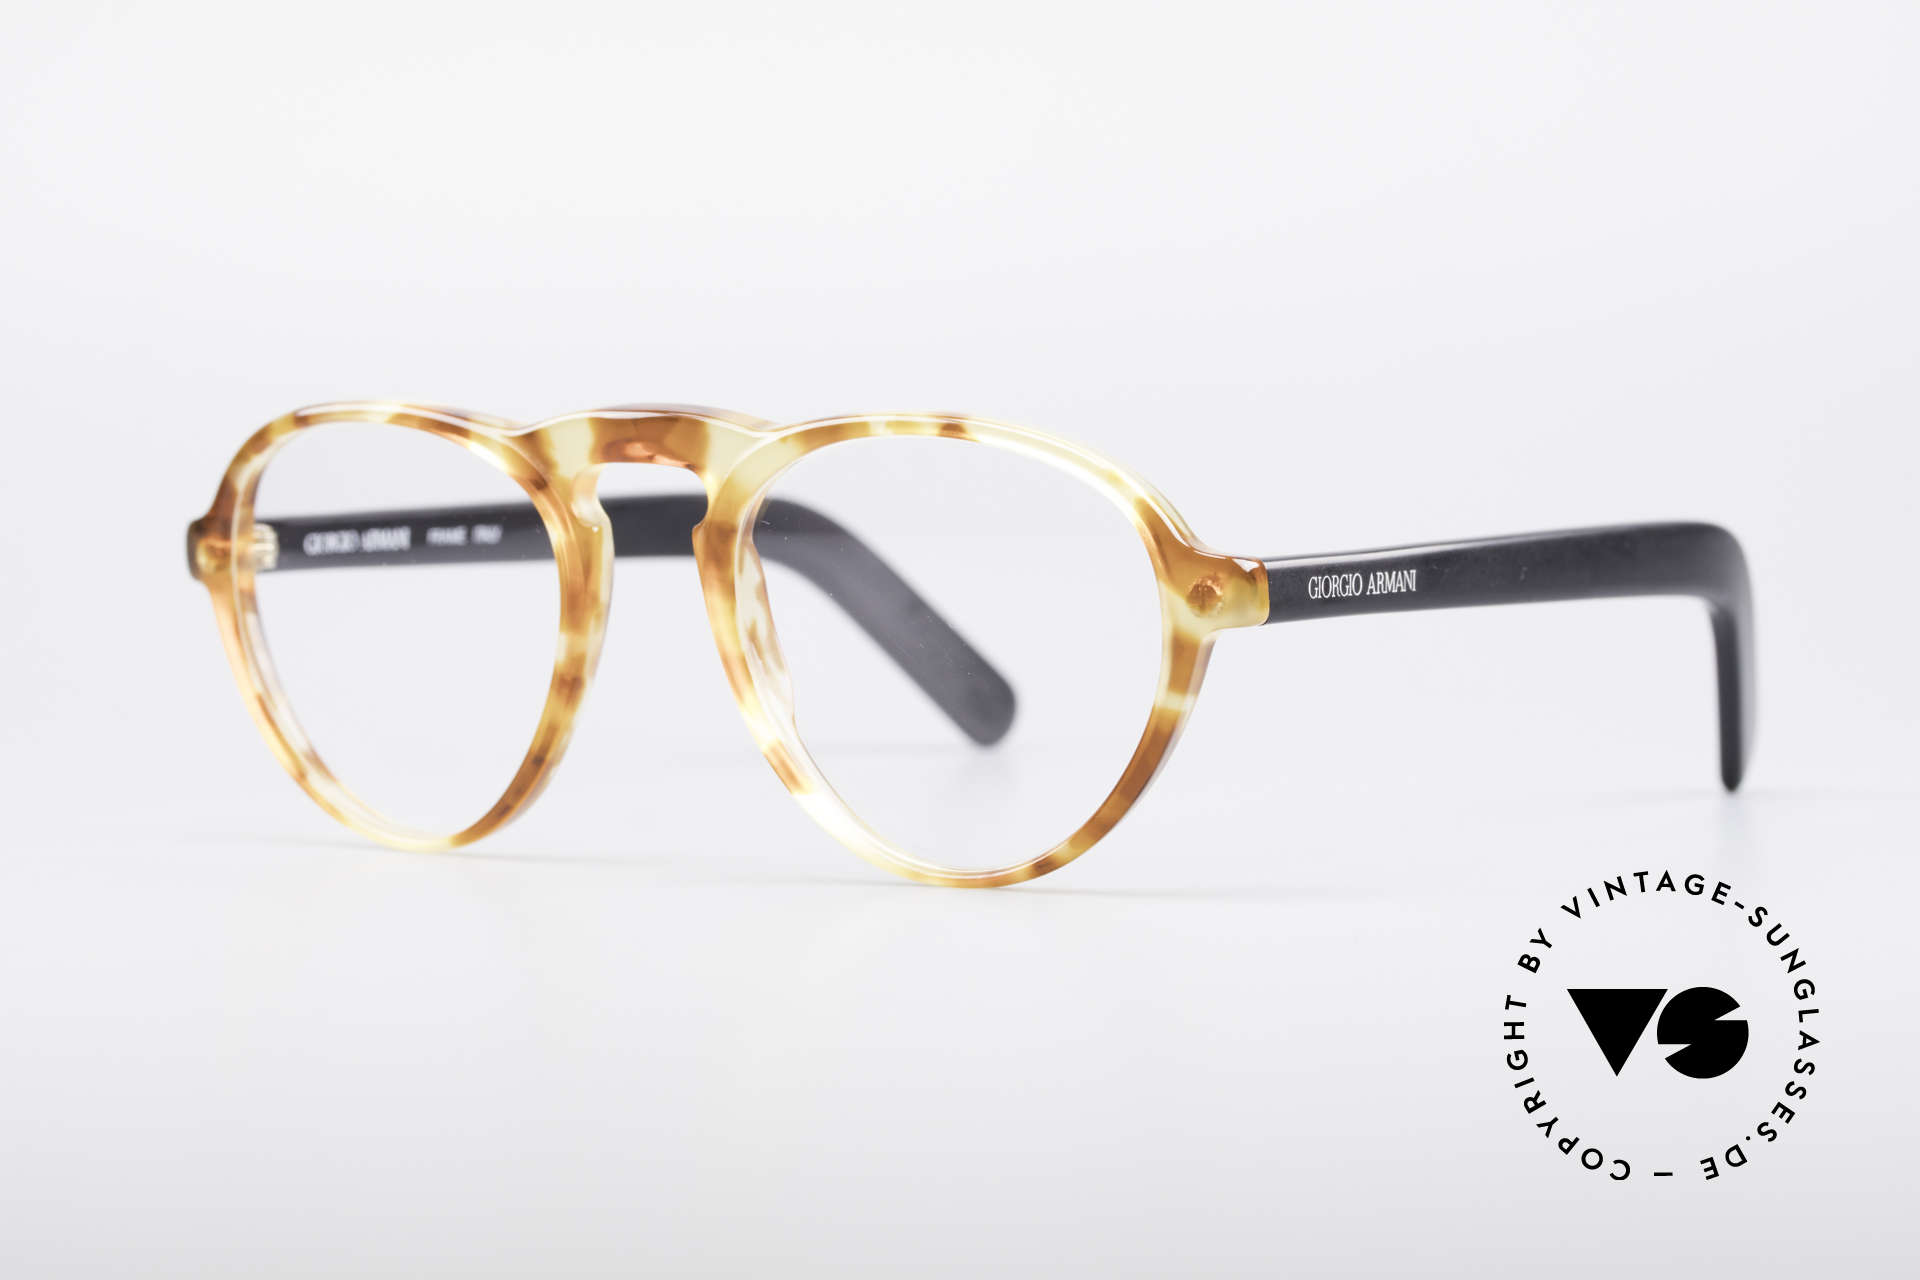 Giorgio Armani 315 True Vintage Eyeglass Frame, great combination of quality, design and comfort, Made for Men